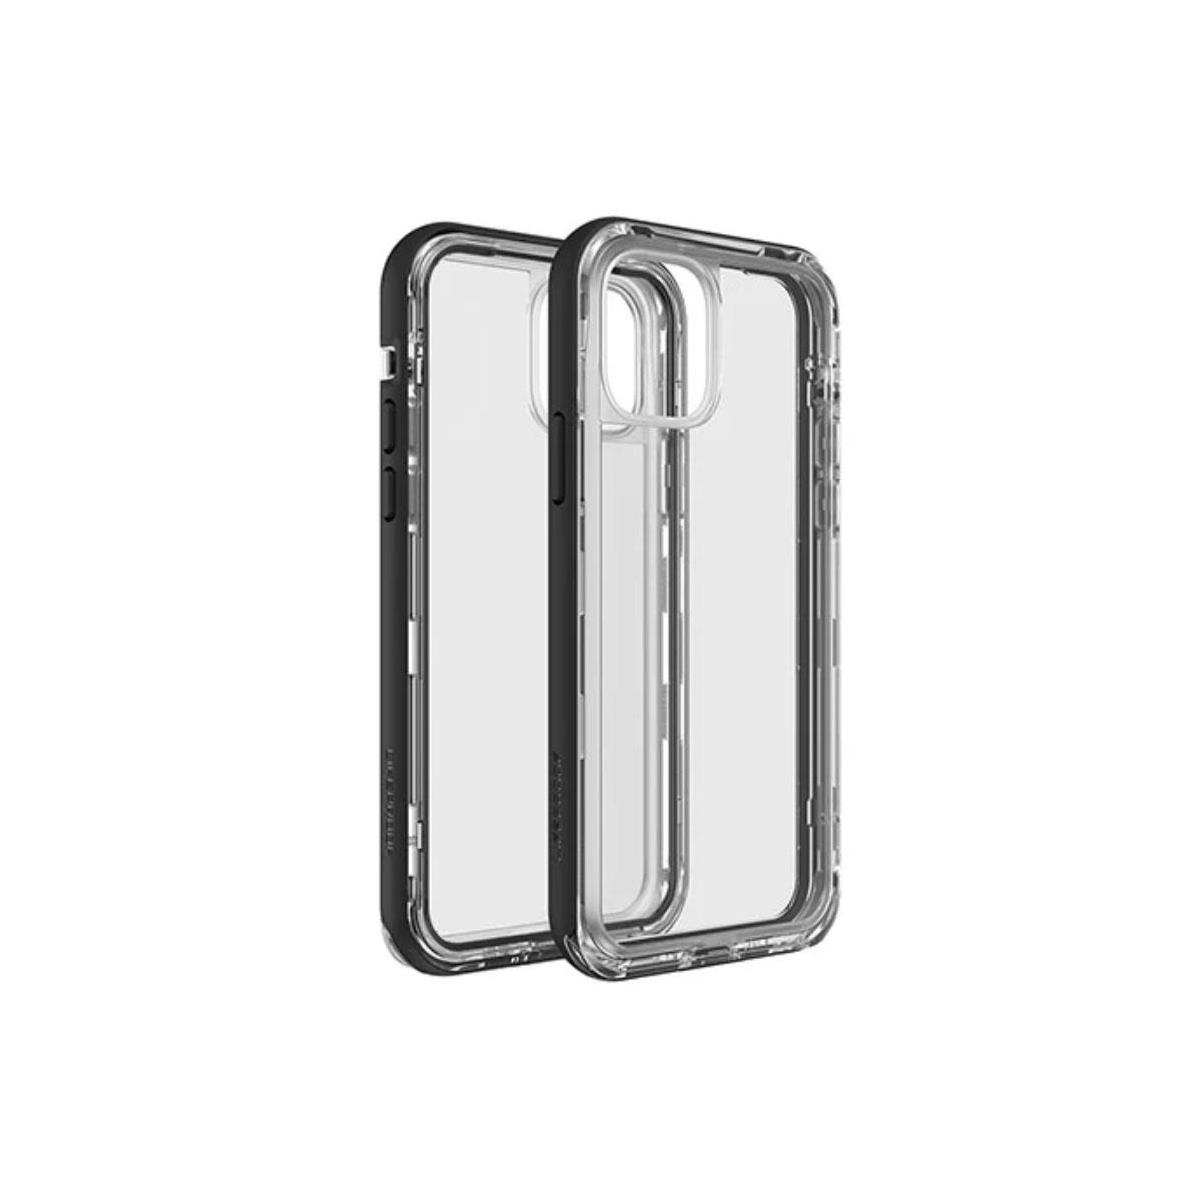 Image of LifeProof NEXT Case for iPhone 11 Pro